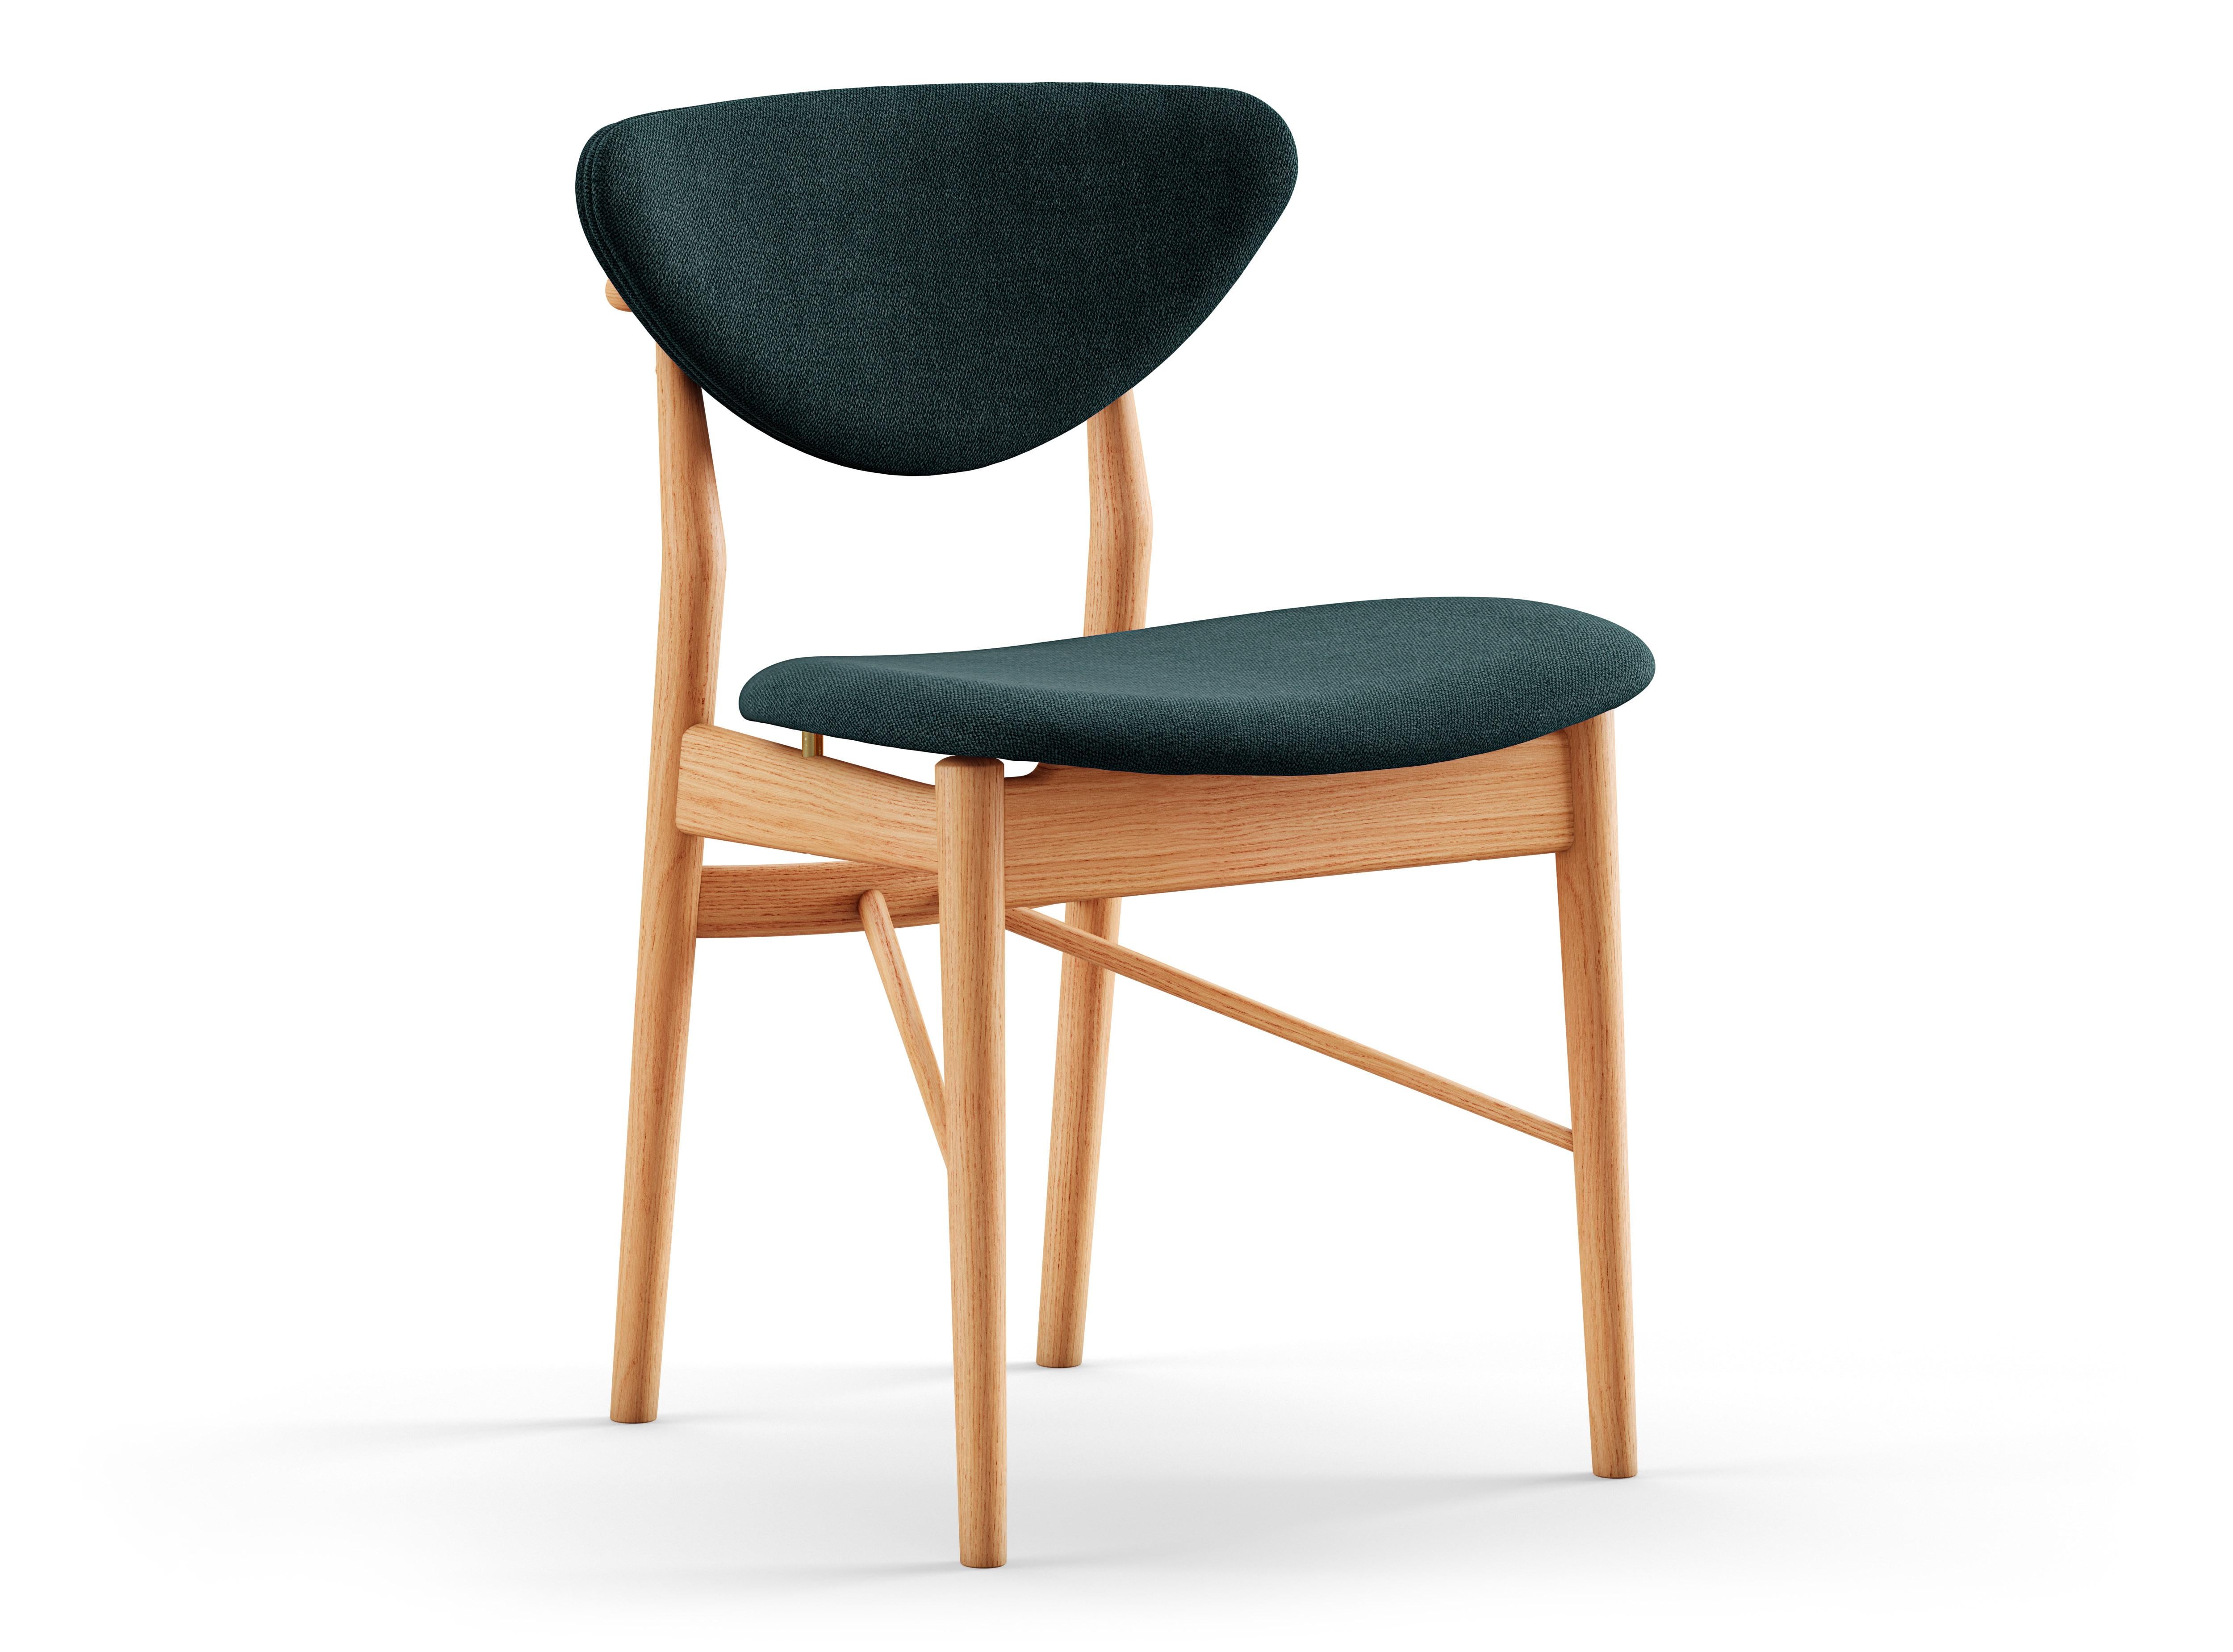 108 Chairs designed by Finn Juhl in 1946, relaunched in 208.
Manufactured by House of Finn Juhl in Denmark.

To this day, Finn Juhl's designs are unconventional and defy expectations with subtle details. Finn Juhl himself once said that the